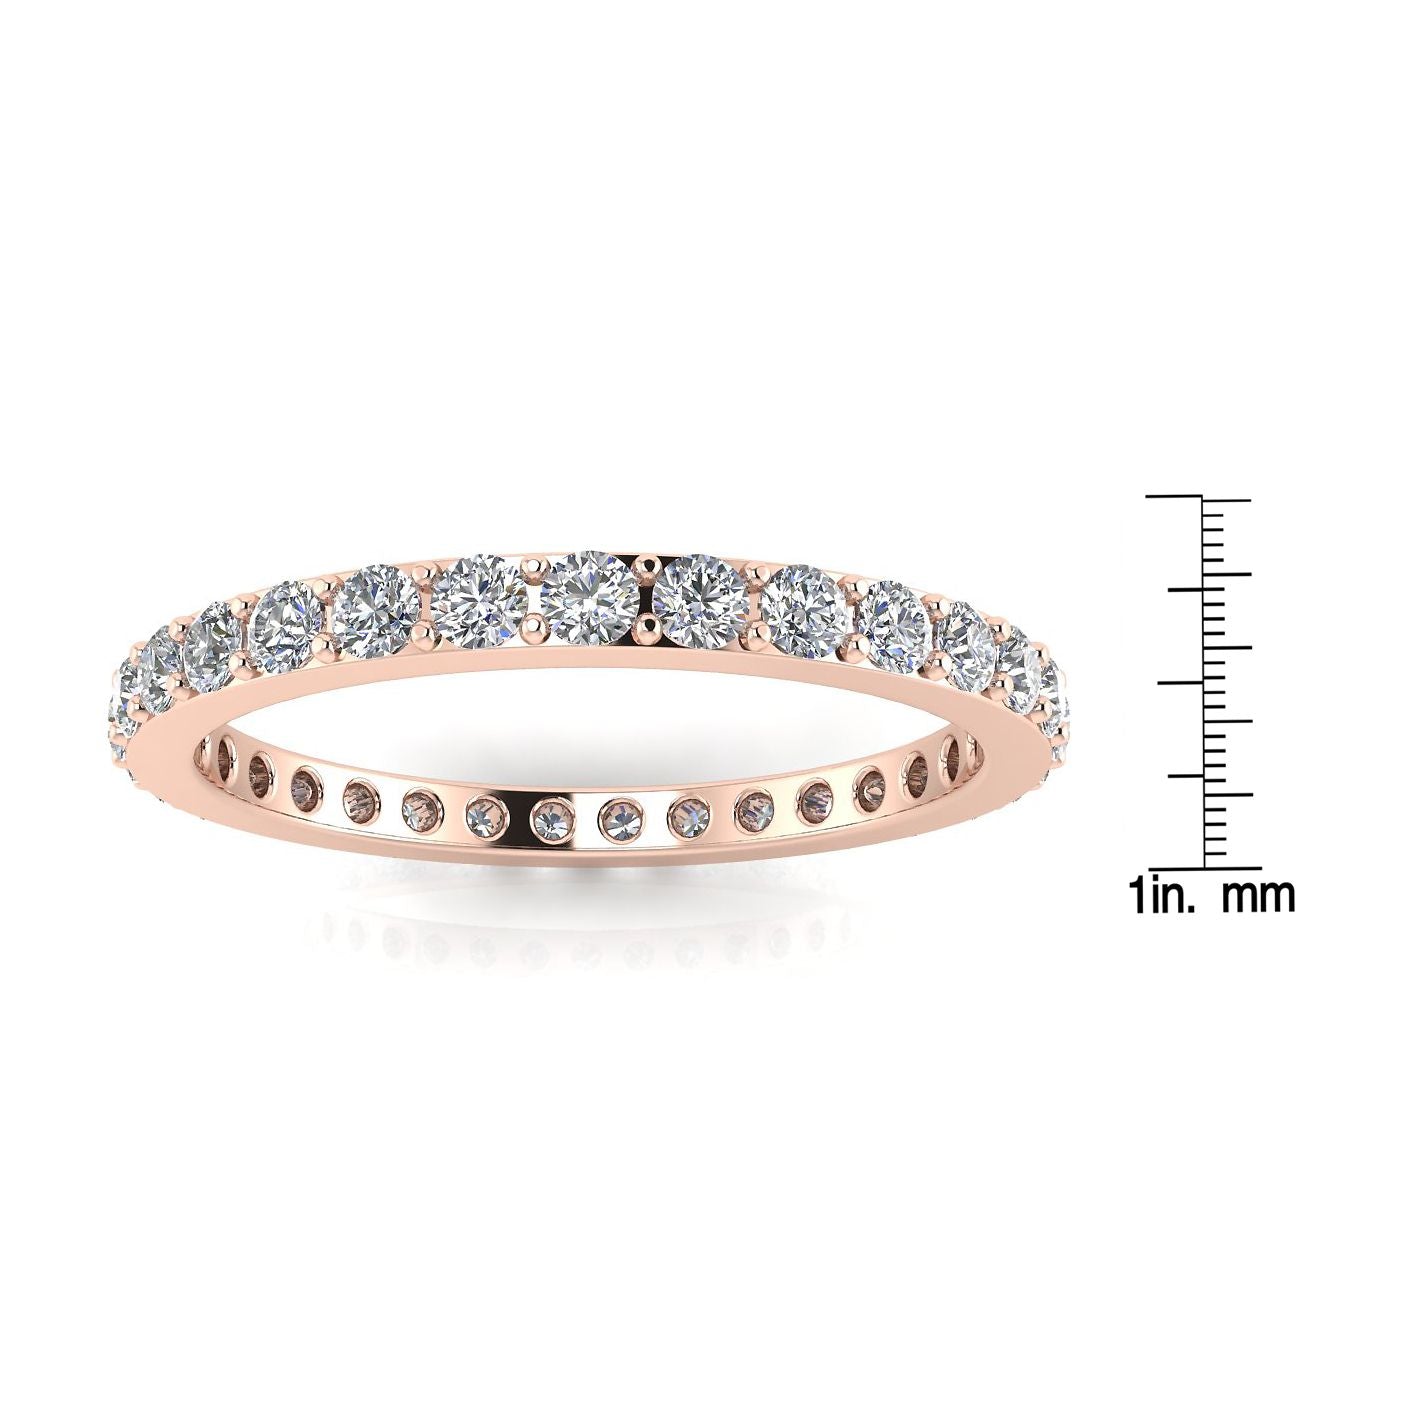 Round Brilliant Cut Diamond Pave Set Eternity Ring In 14k Rose Gold  (0.43ct. Tw.) Ring Size 4.5